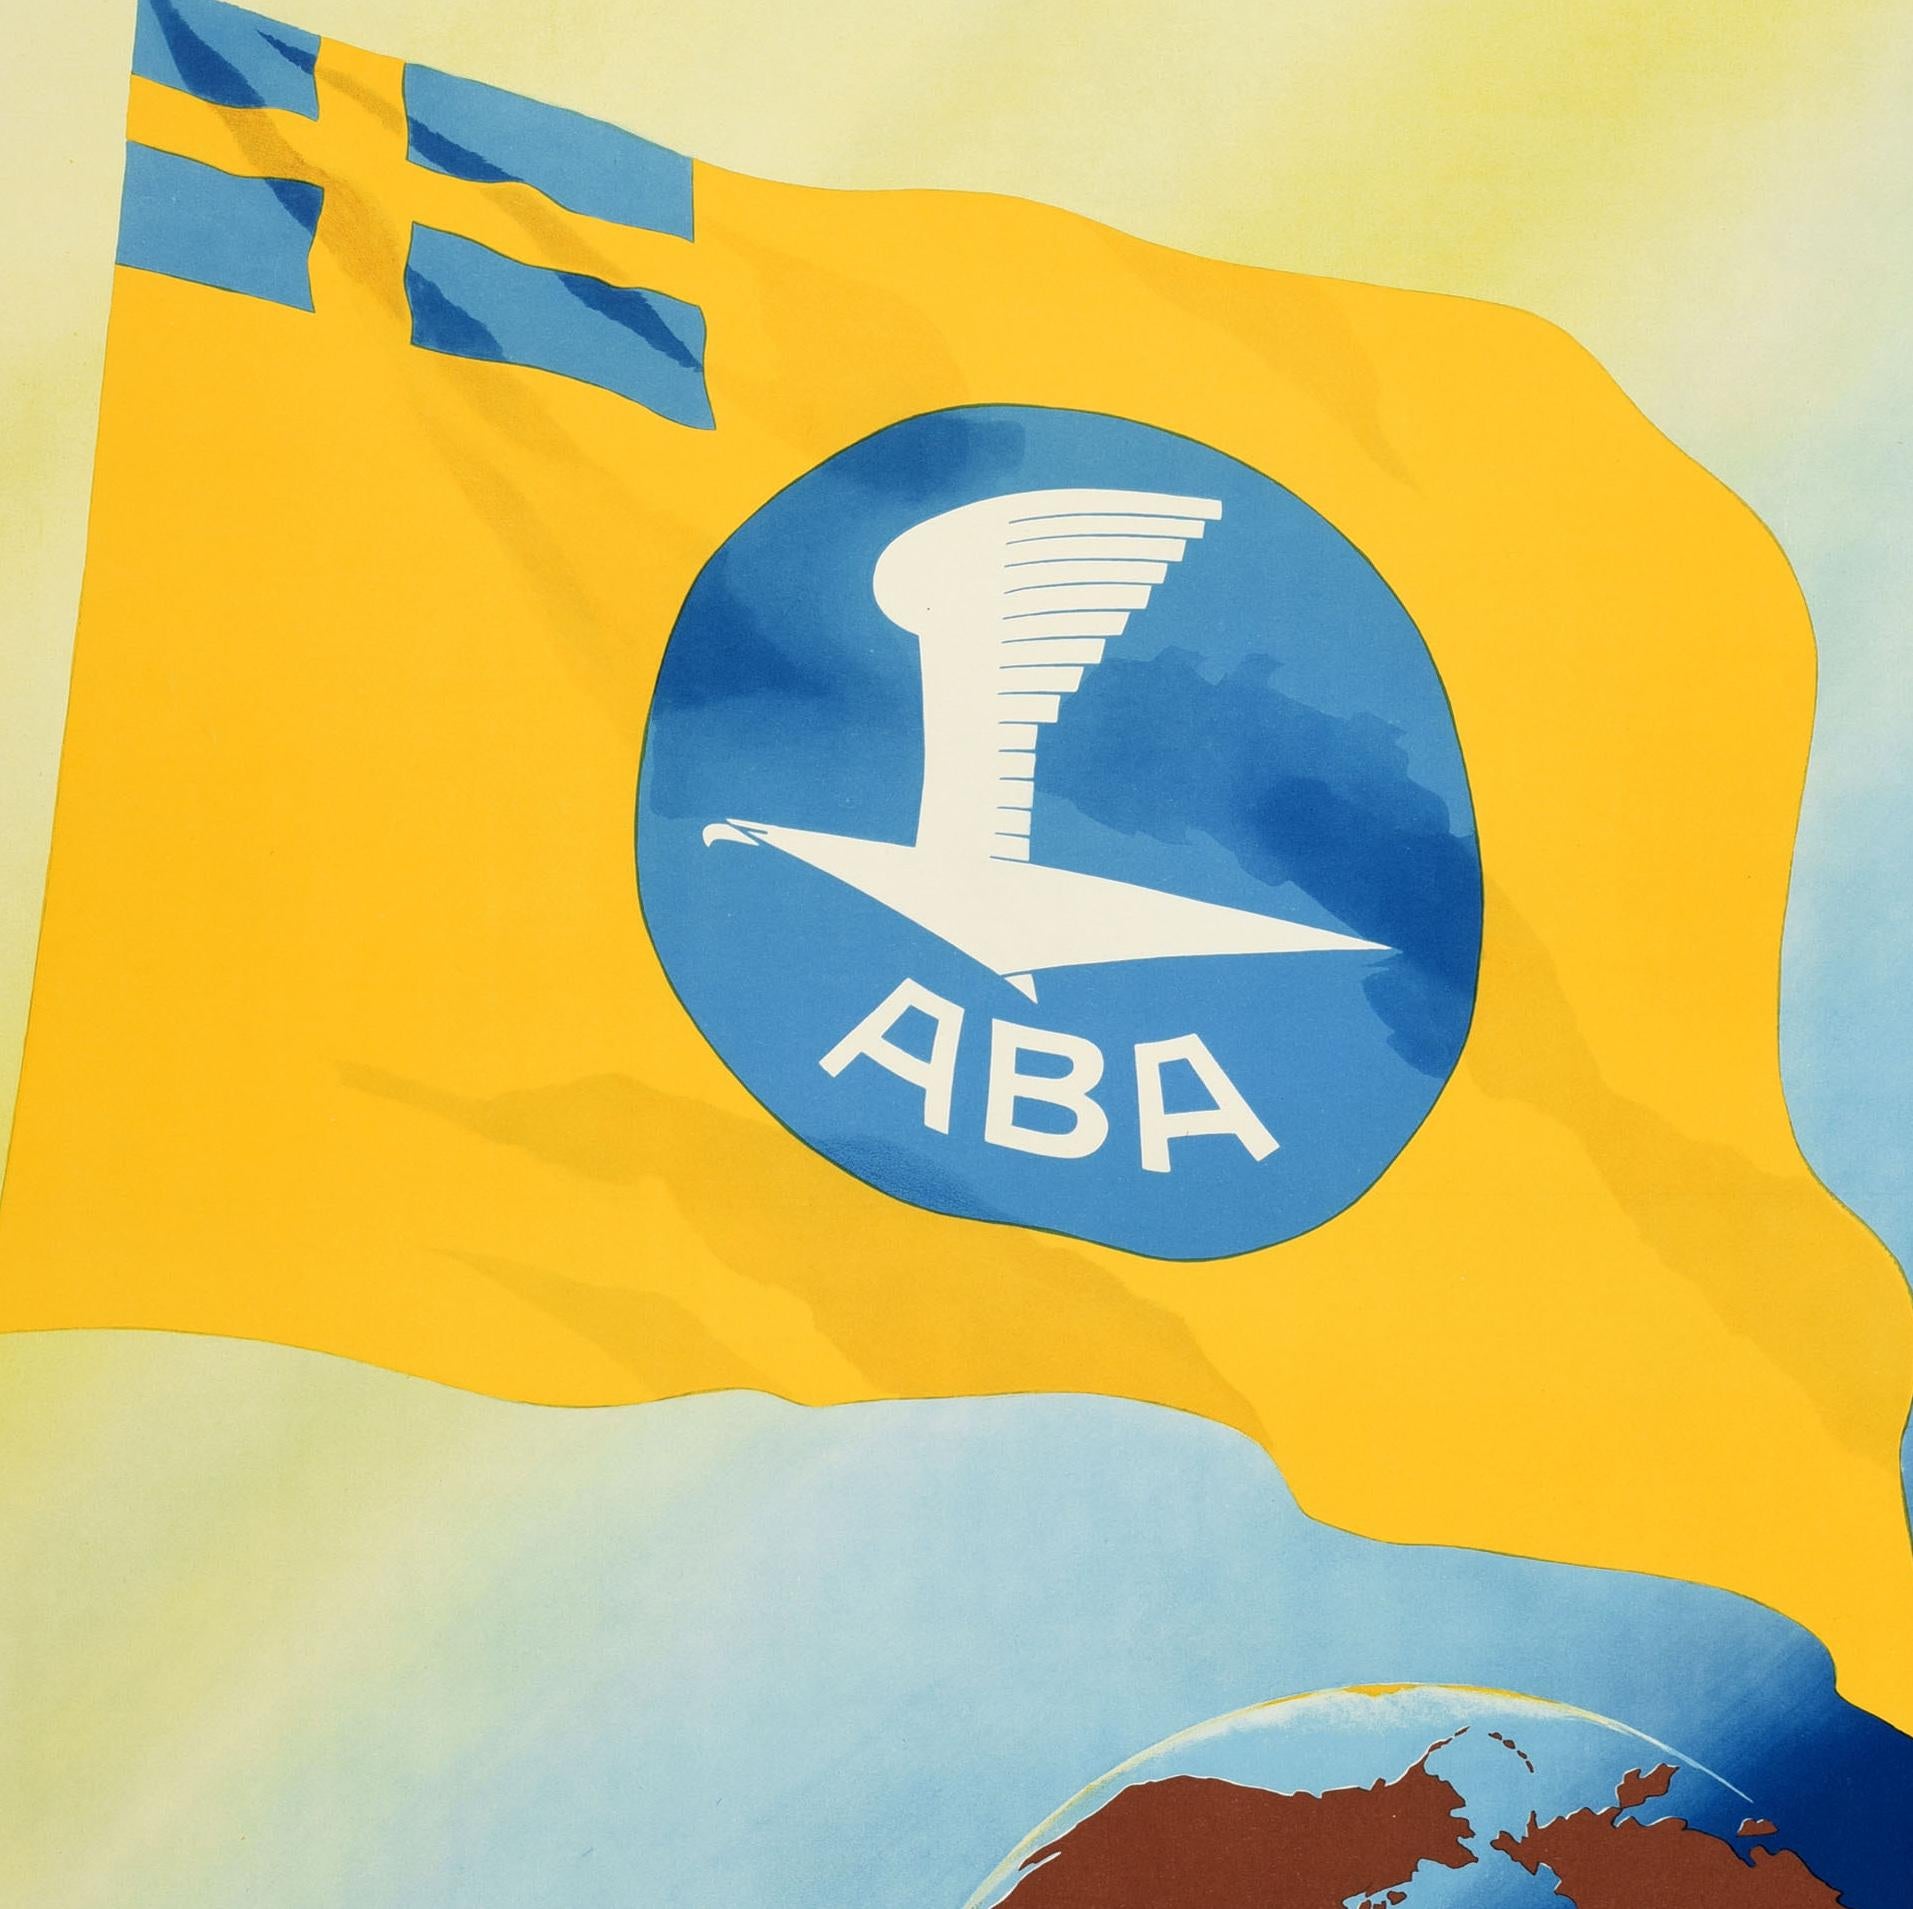 Original vintage travel advertising poster for ABA Swedish Air Lines (1924-1950; now part of the SAS Group / Scandinavian Airlines System). Great design depicting the Swedish blue and yellow cross with the ABA logo on a yellow flag flying above a